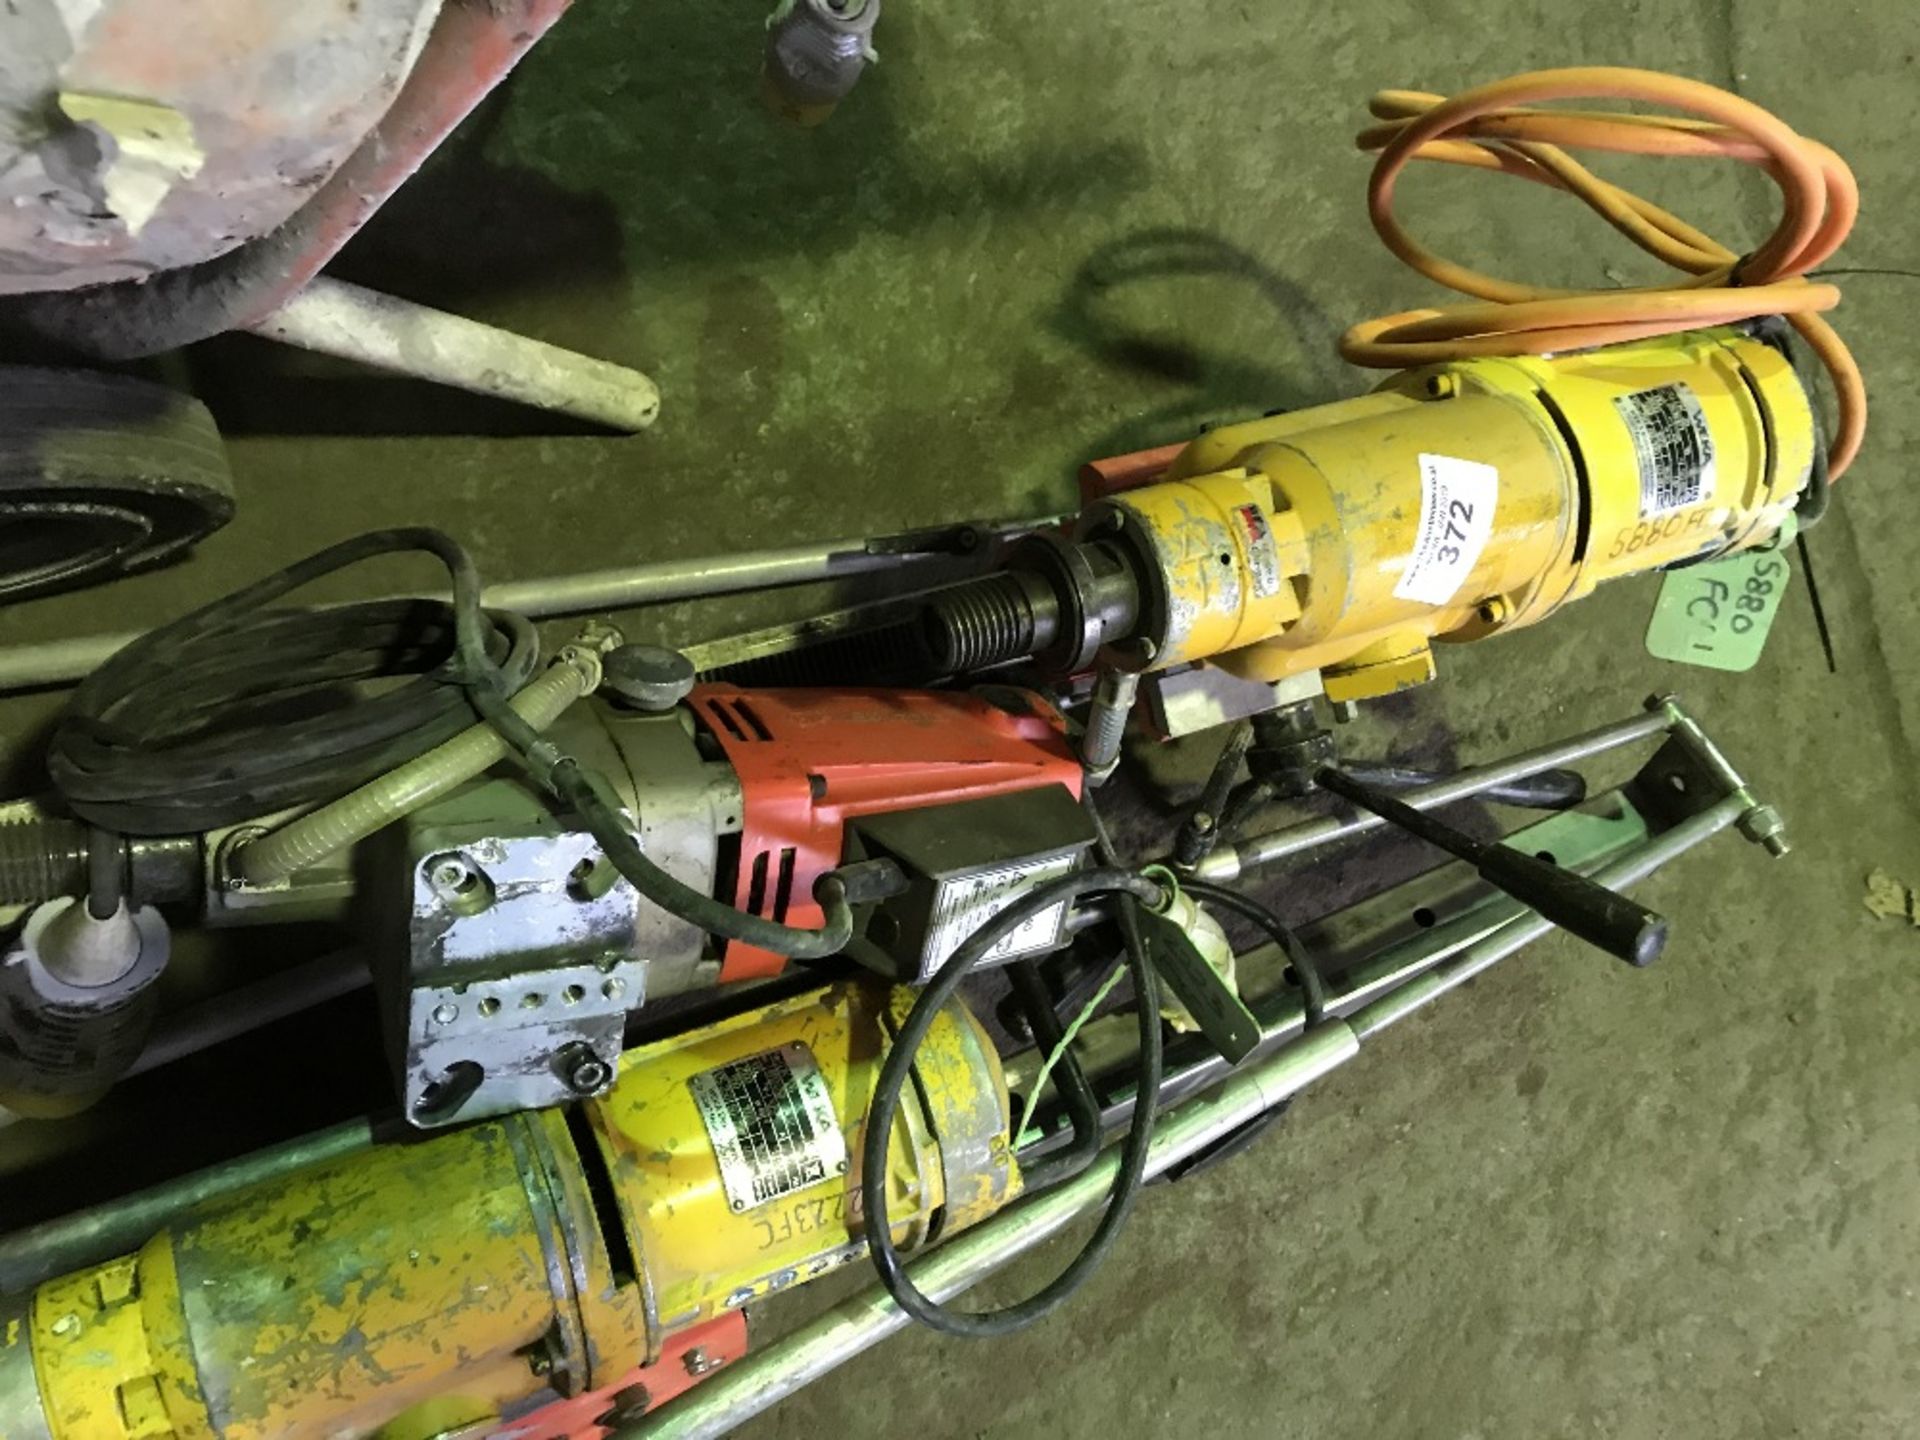 3 X DIAMOND DRILL UNITS C/W 2 X STANDS, CONDITION UNKNOWN - Image 3 of 5